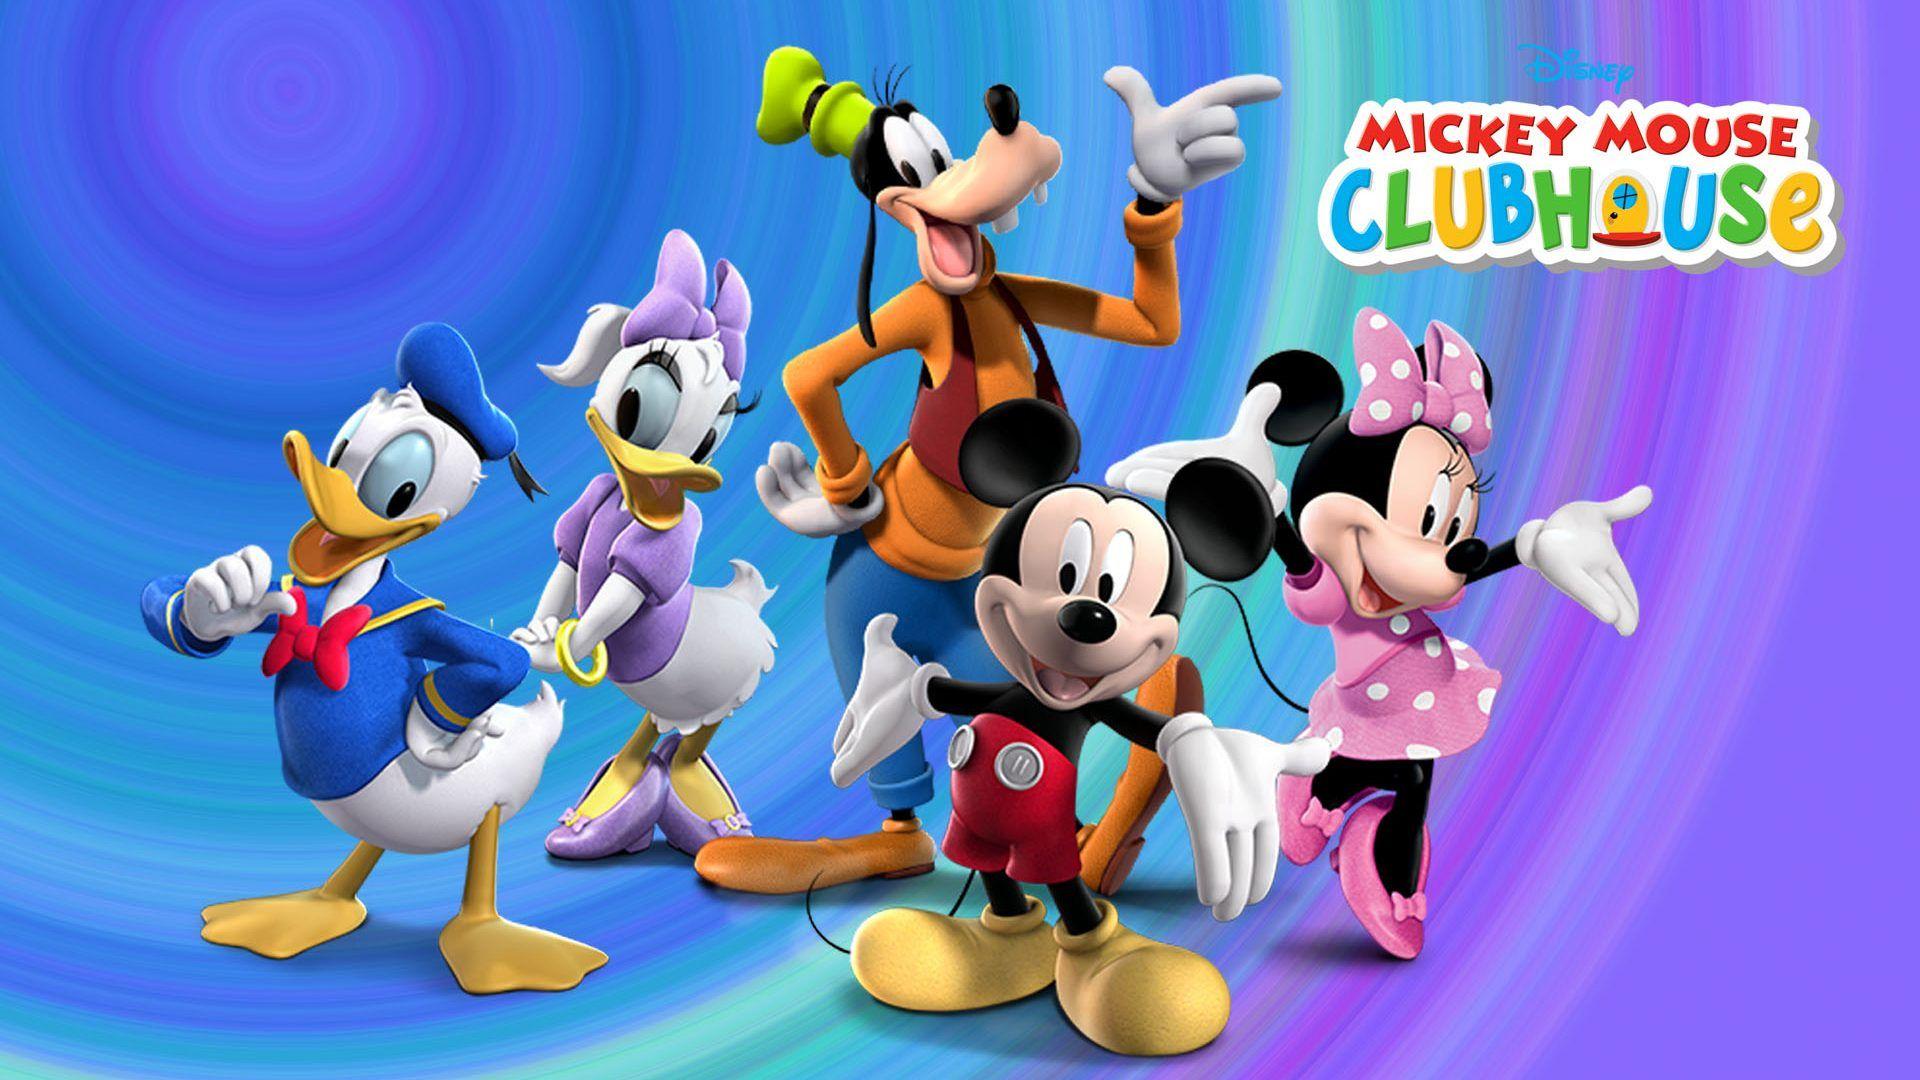 Mickey And Friends Clubhouse Disney Cartoon For Children Desktop